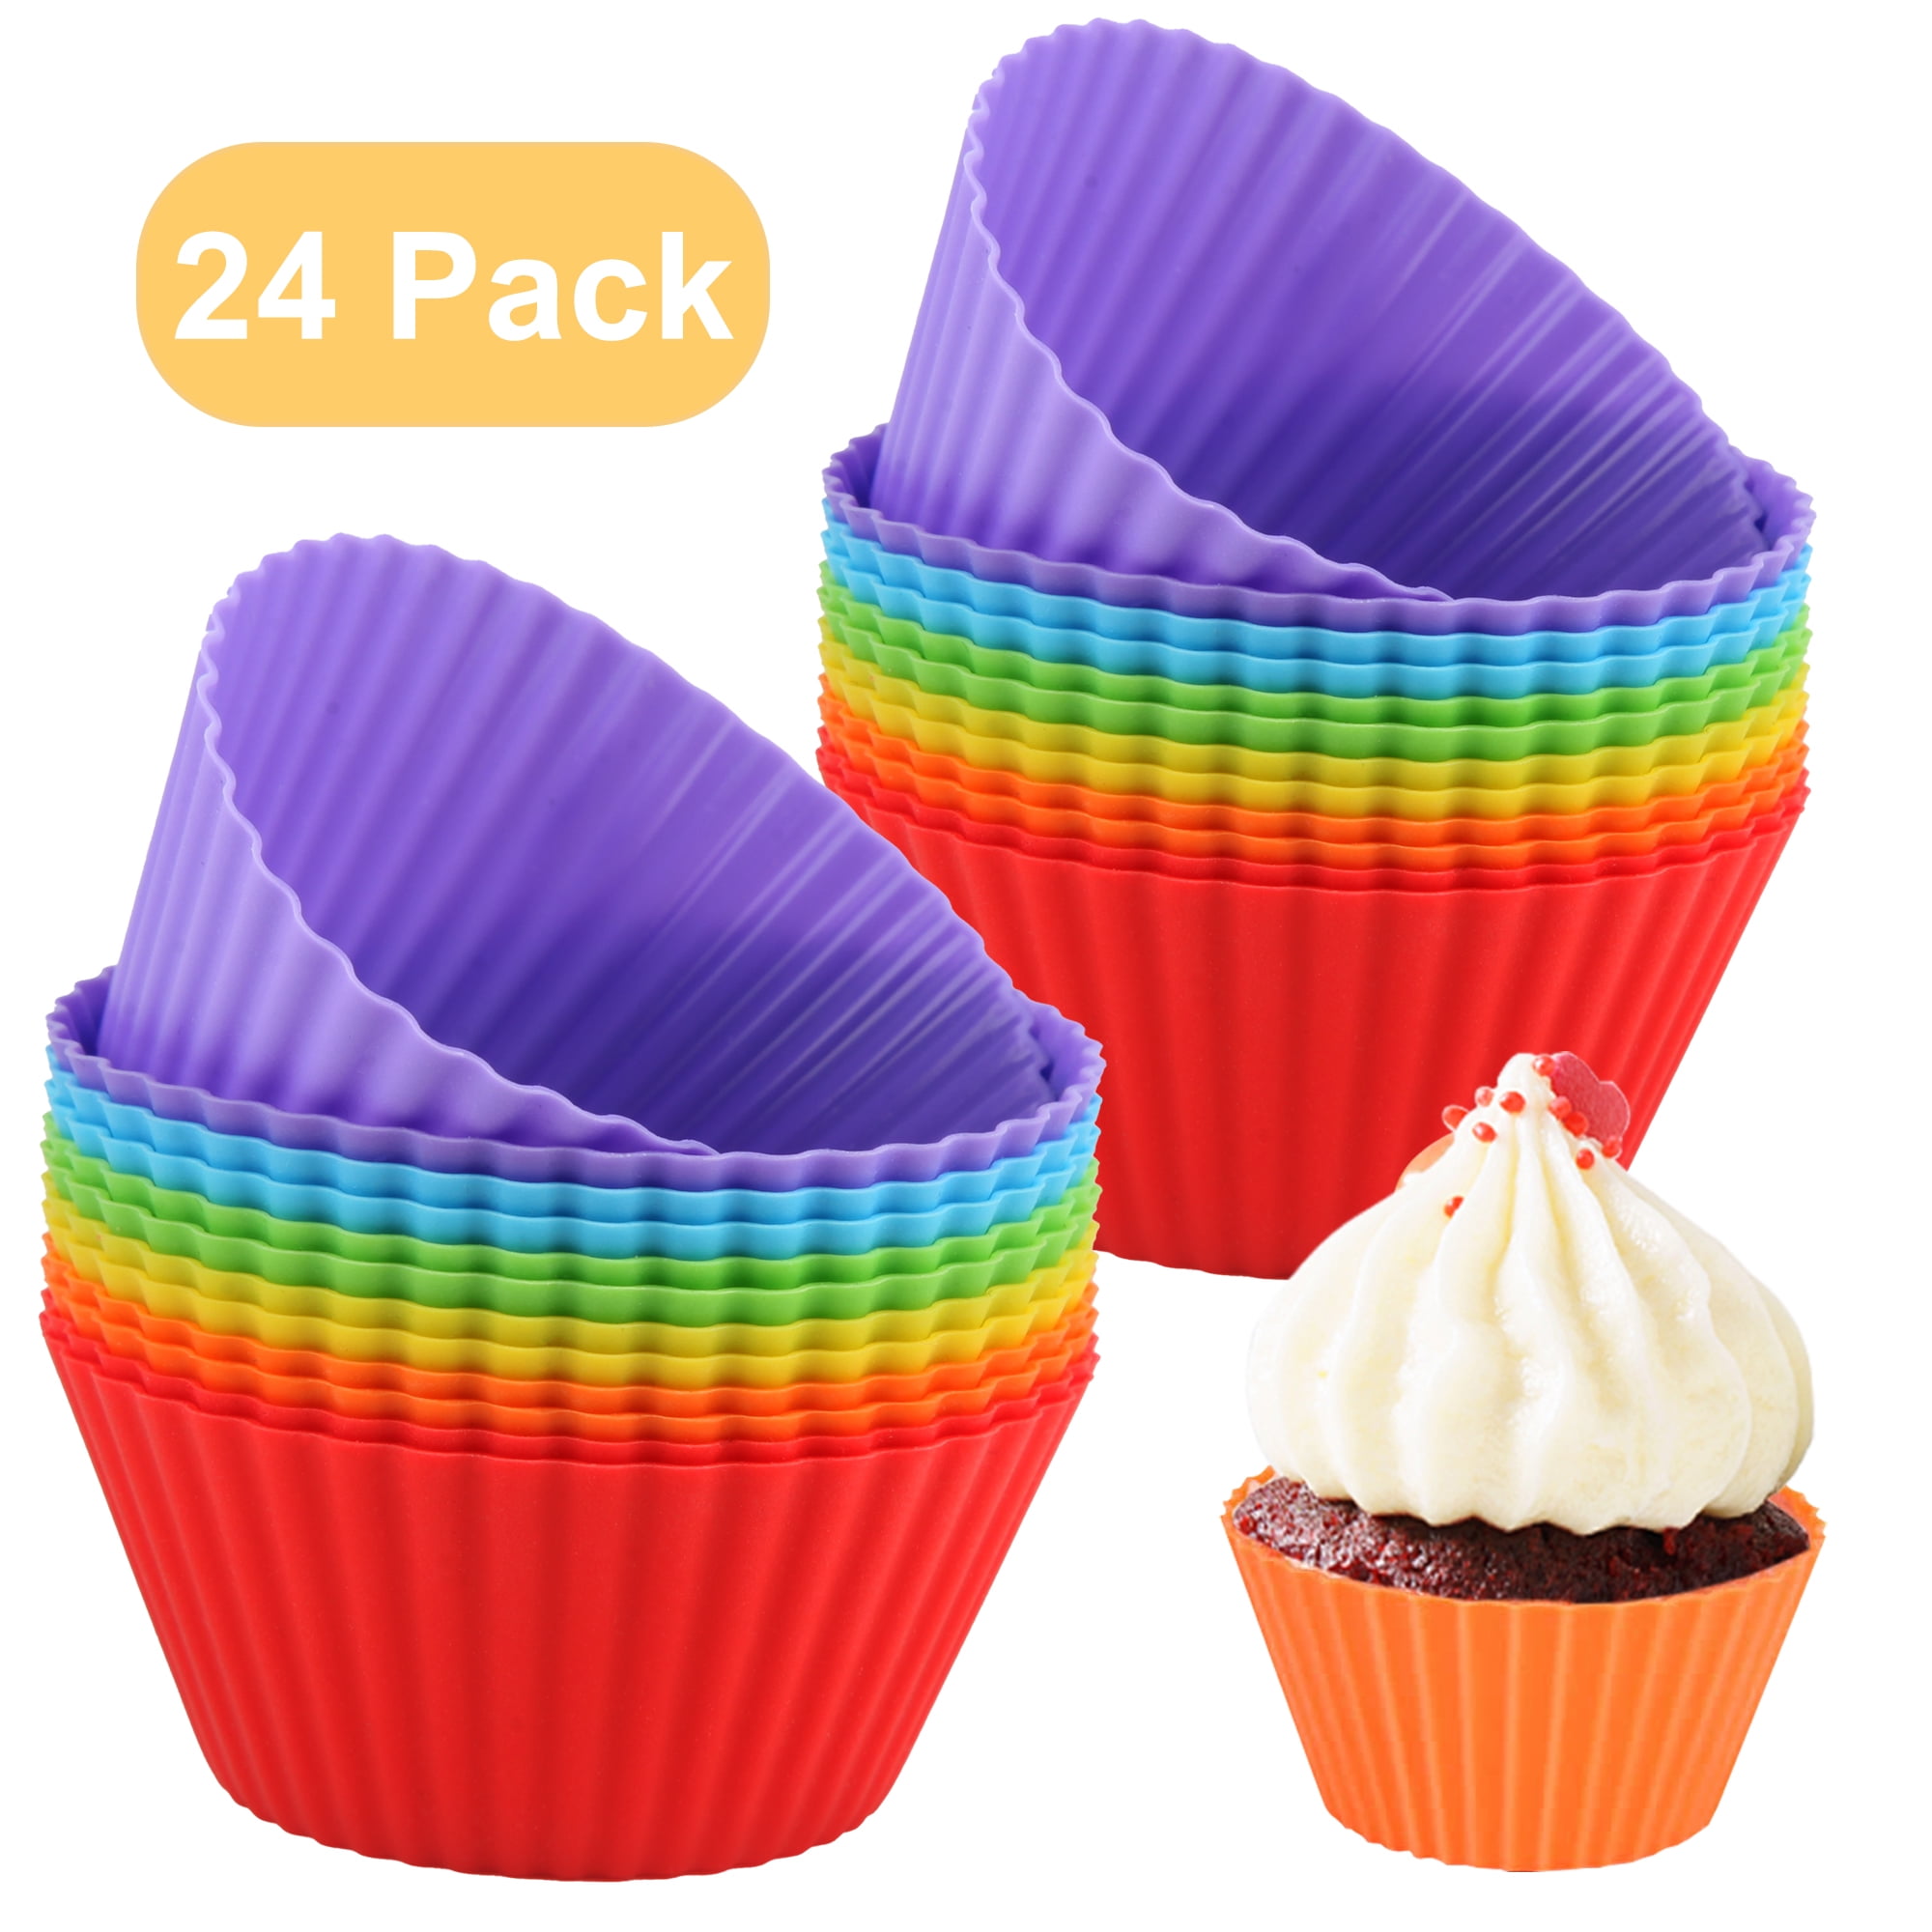 Mini Cupcake Liners  Larger Midi Size Baking Cups For Cupcakes, Muffins,  Cake Pops, Truffles - Sweets & Treats™